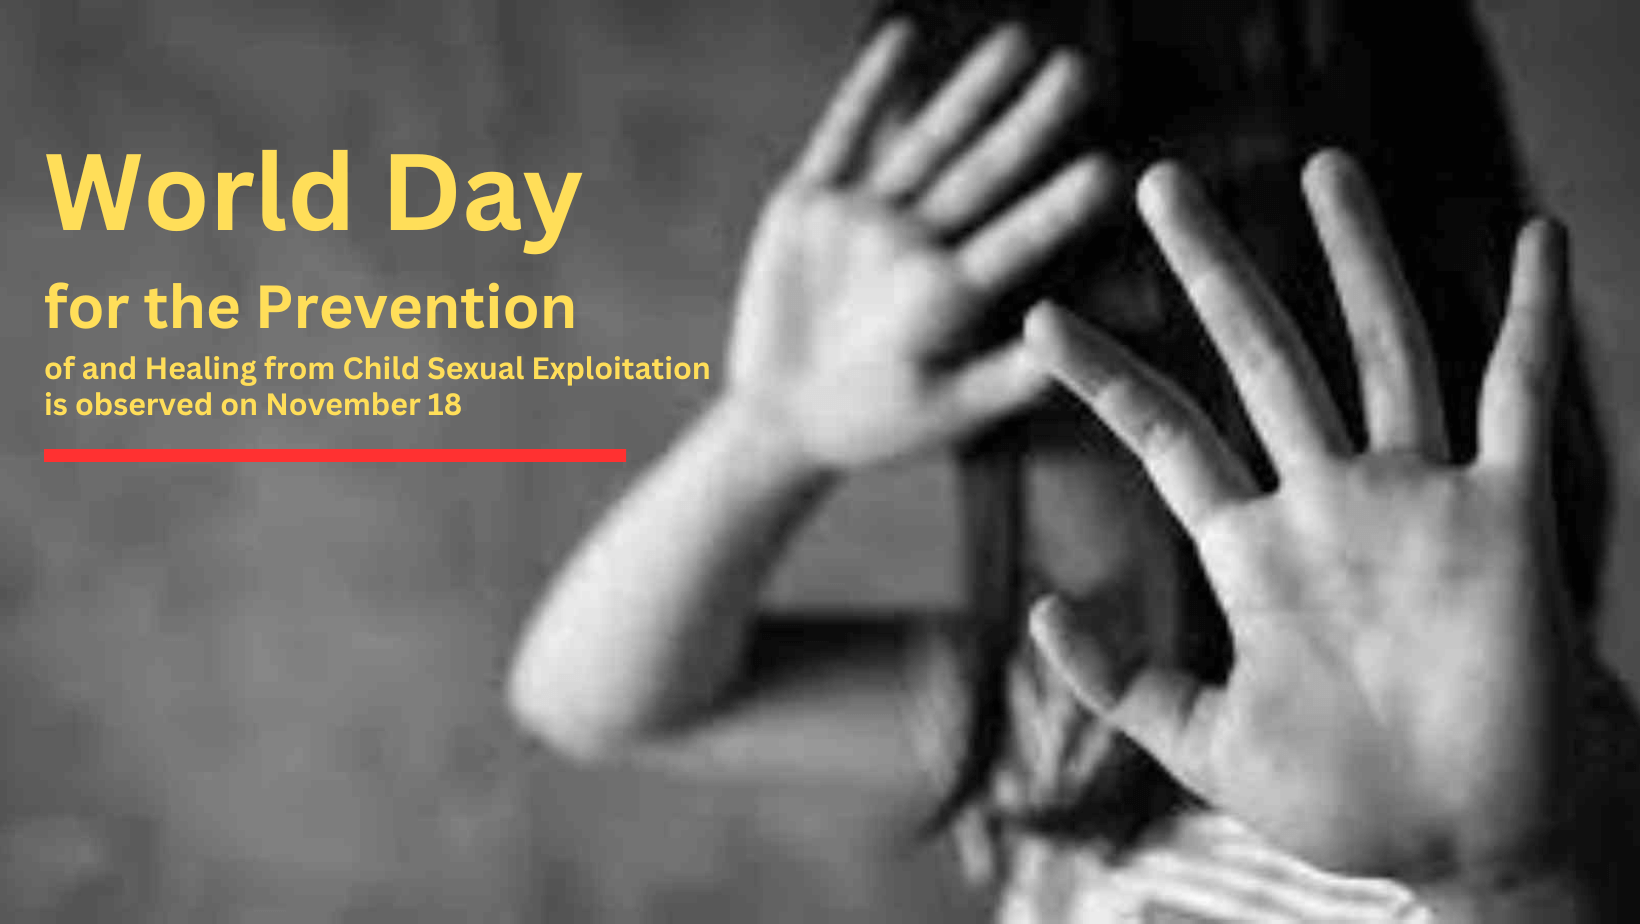 World Day for the Prevention of Child Sexual Exploitation